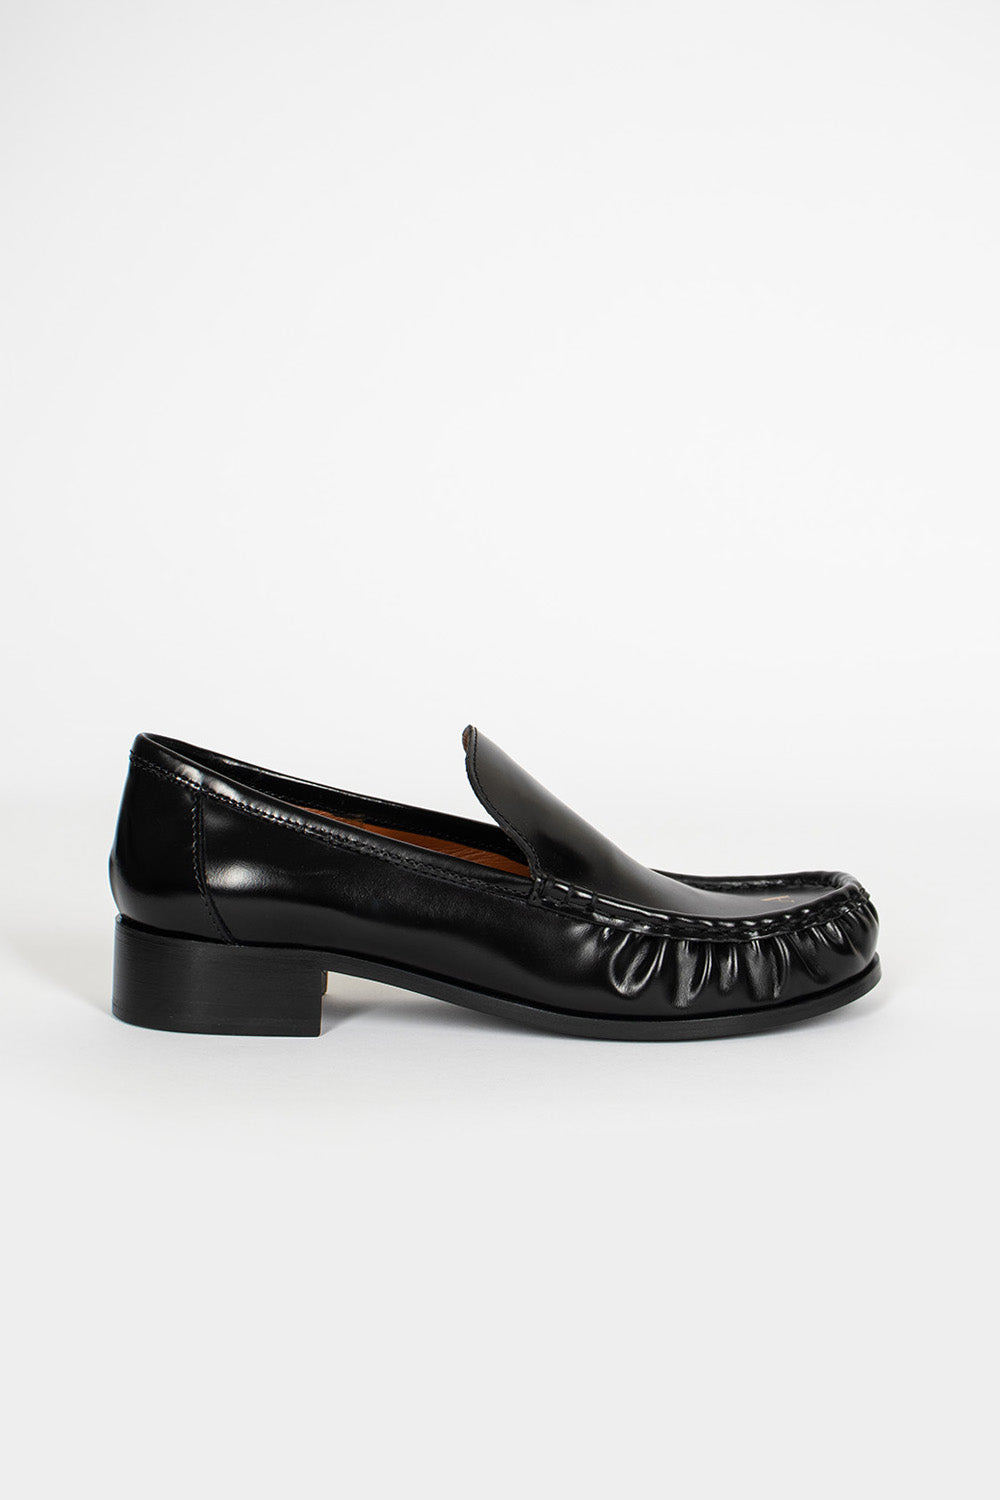 Initial Loafers Black